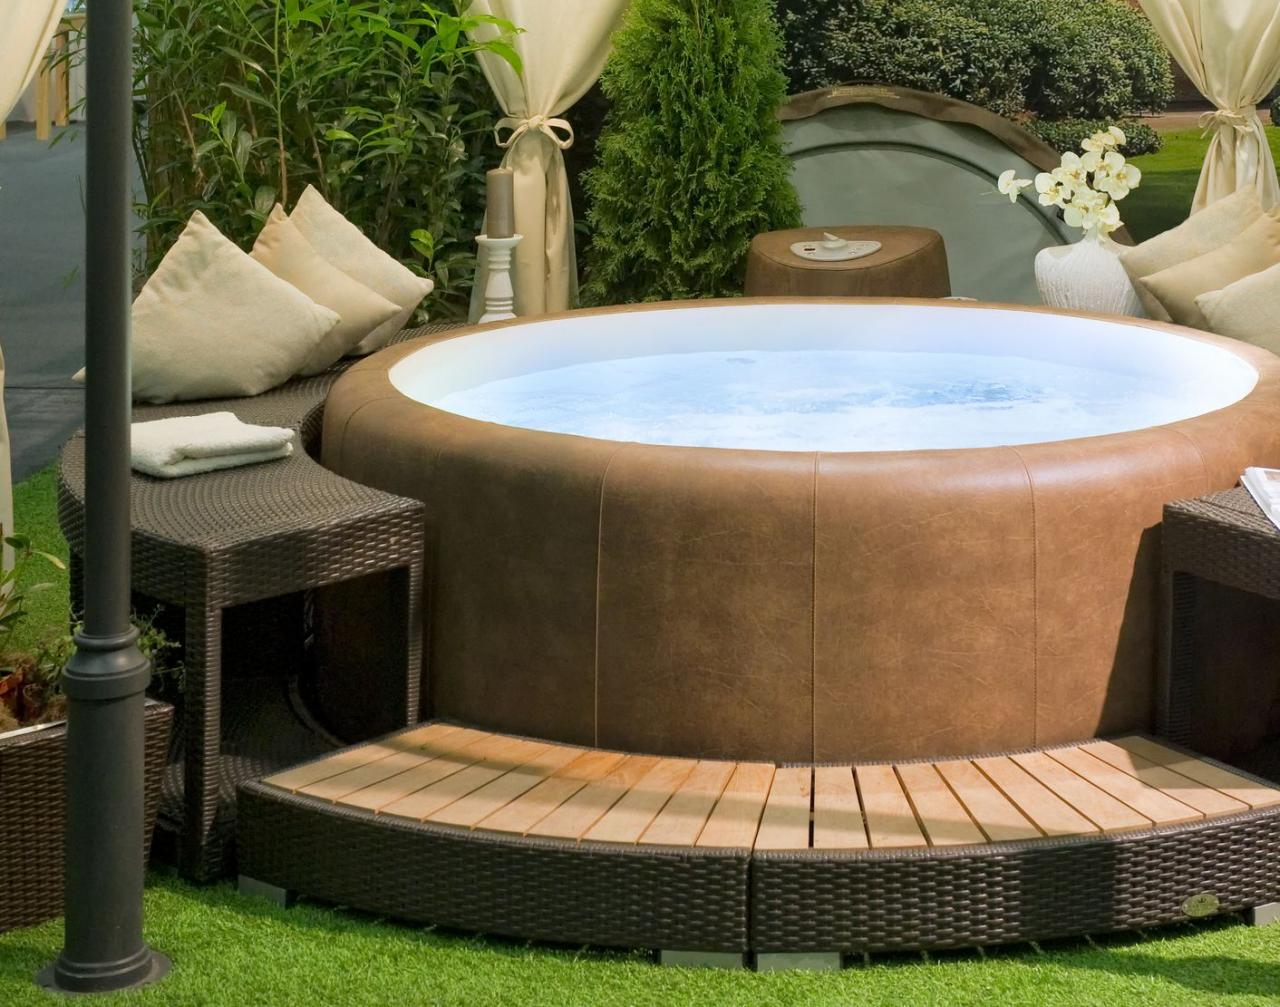 Covered hot tub in a garden